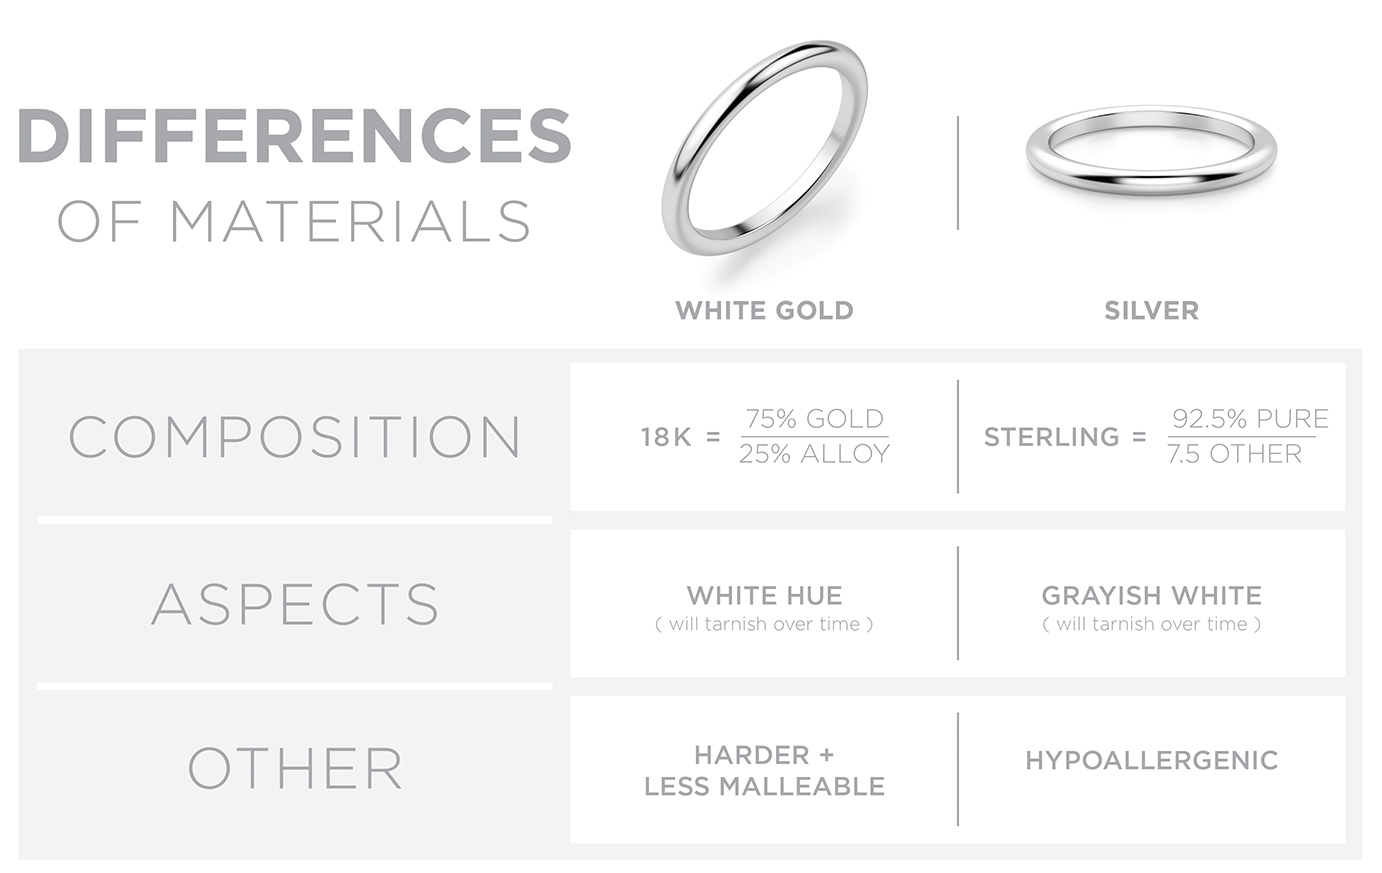 Differences of white gold and silver